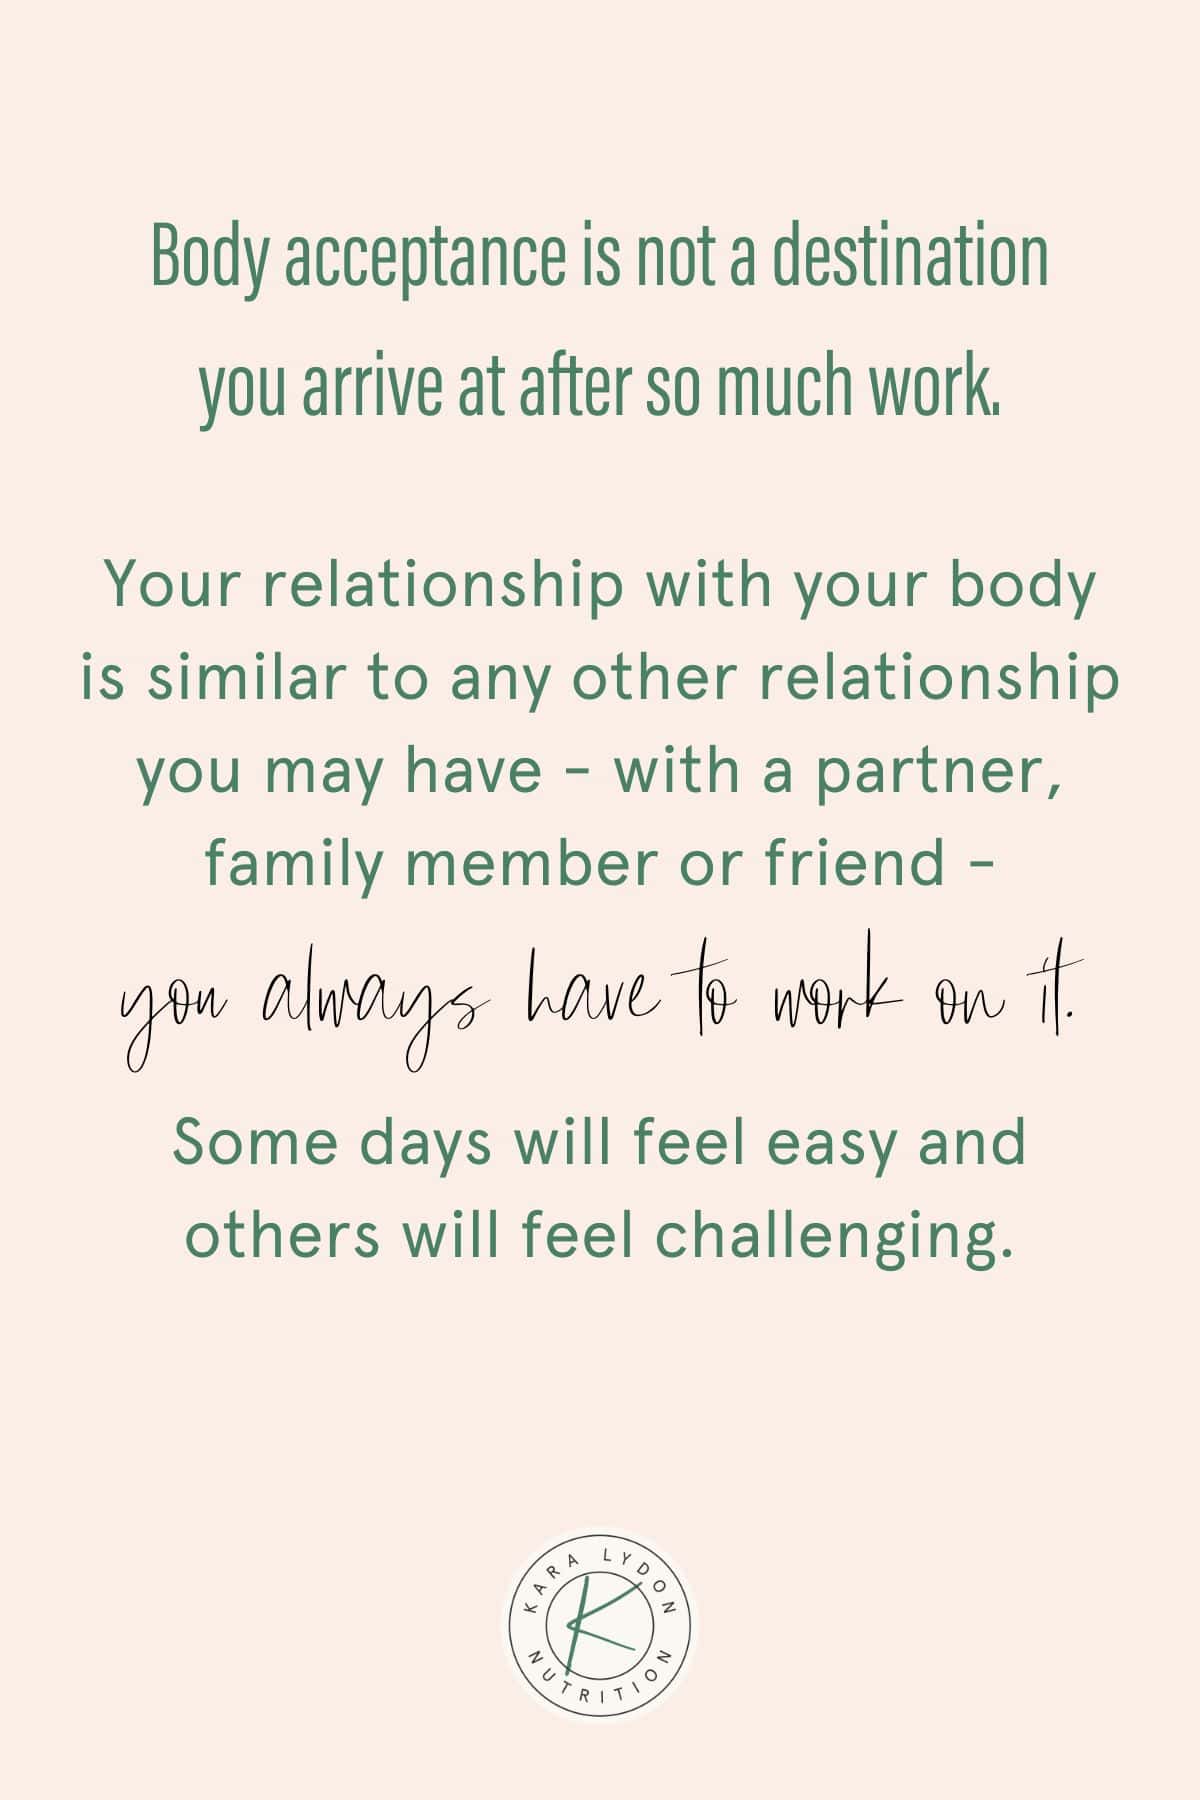 Graphic with quote: "Body acceptance is not a destination you arrive at after so much work. Your relationship with your body is similar to any other relationship you may have - with a partner, family member or friend - you always have to work on it. Some days will feel easy and others will feel challenging."